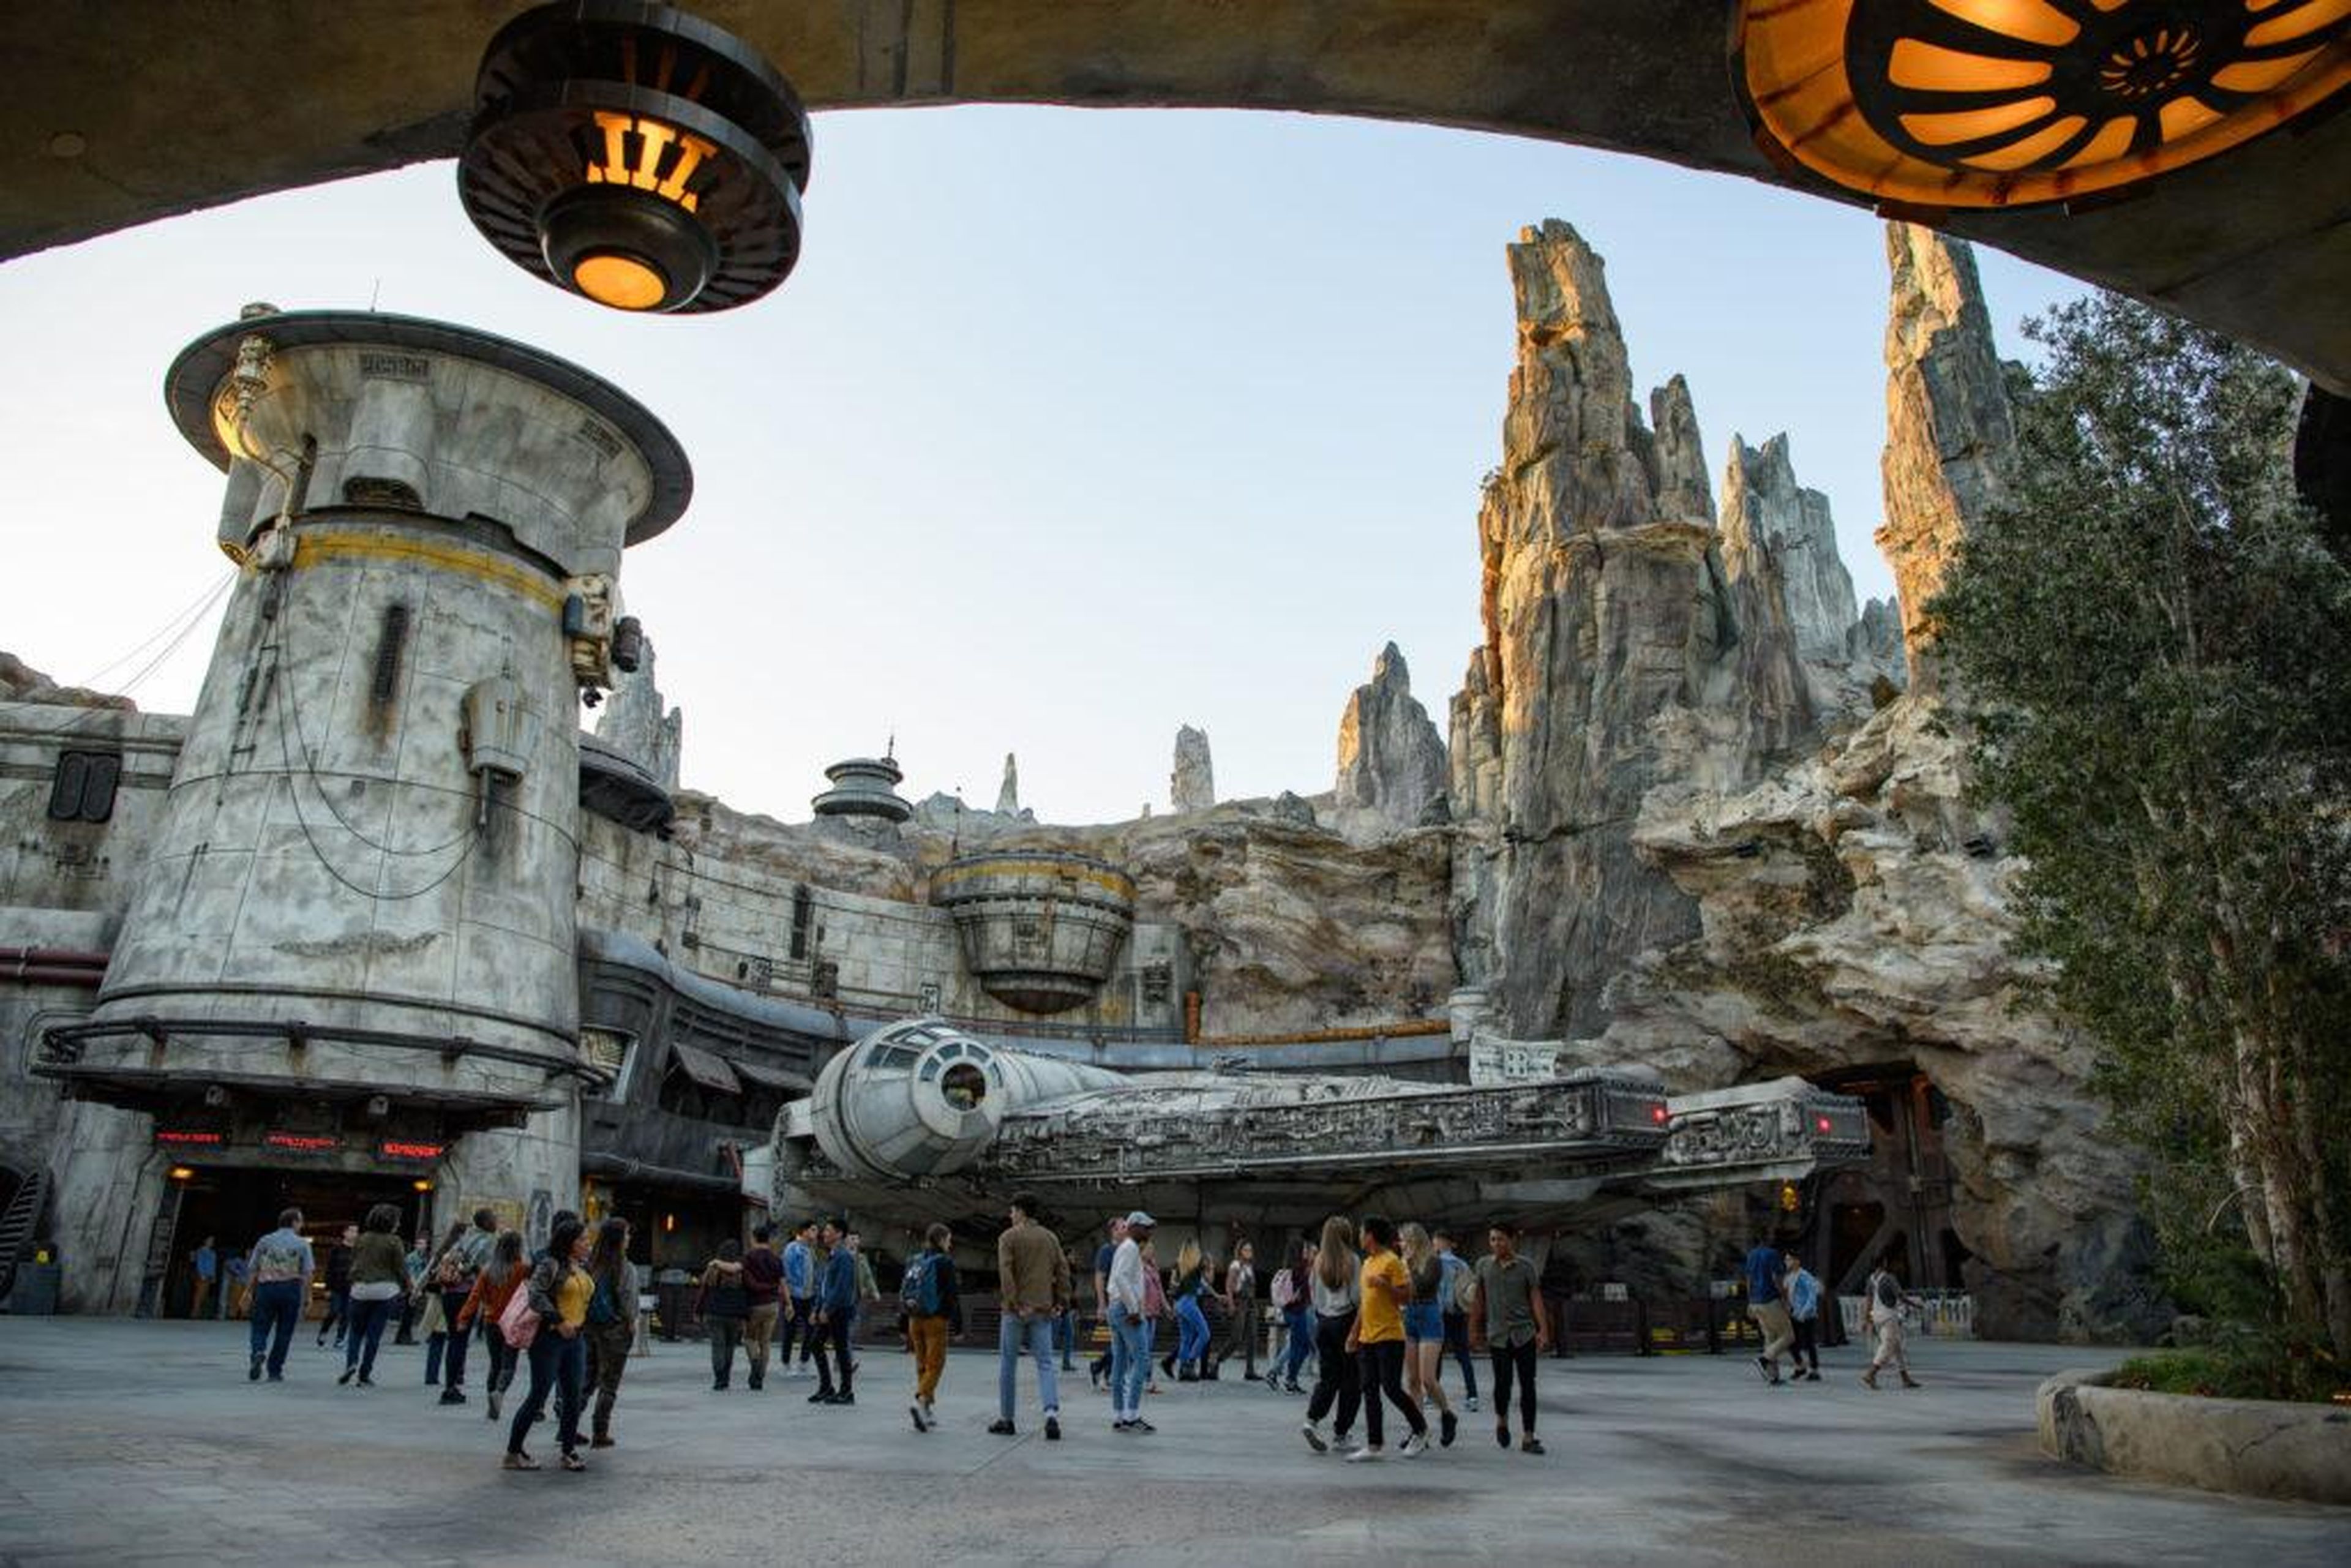 Star Wars: Galaxy's Edge is likely to cause some big crowds at Disneyland and Disney World this summer.